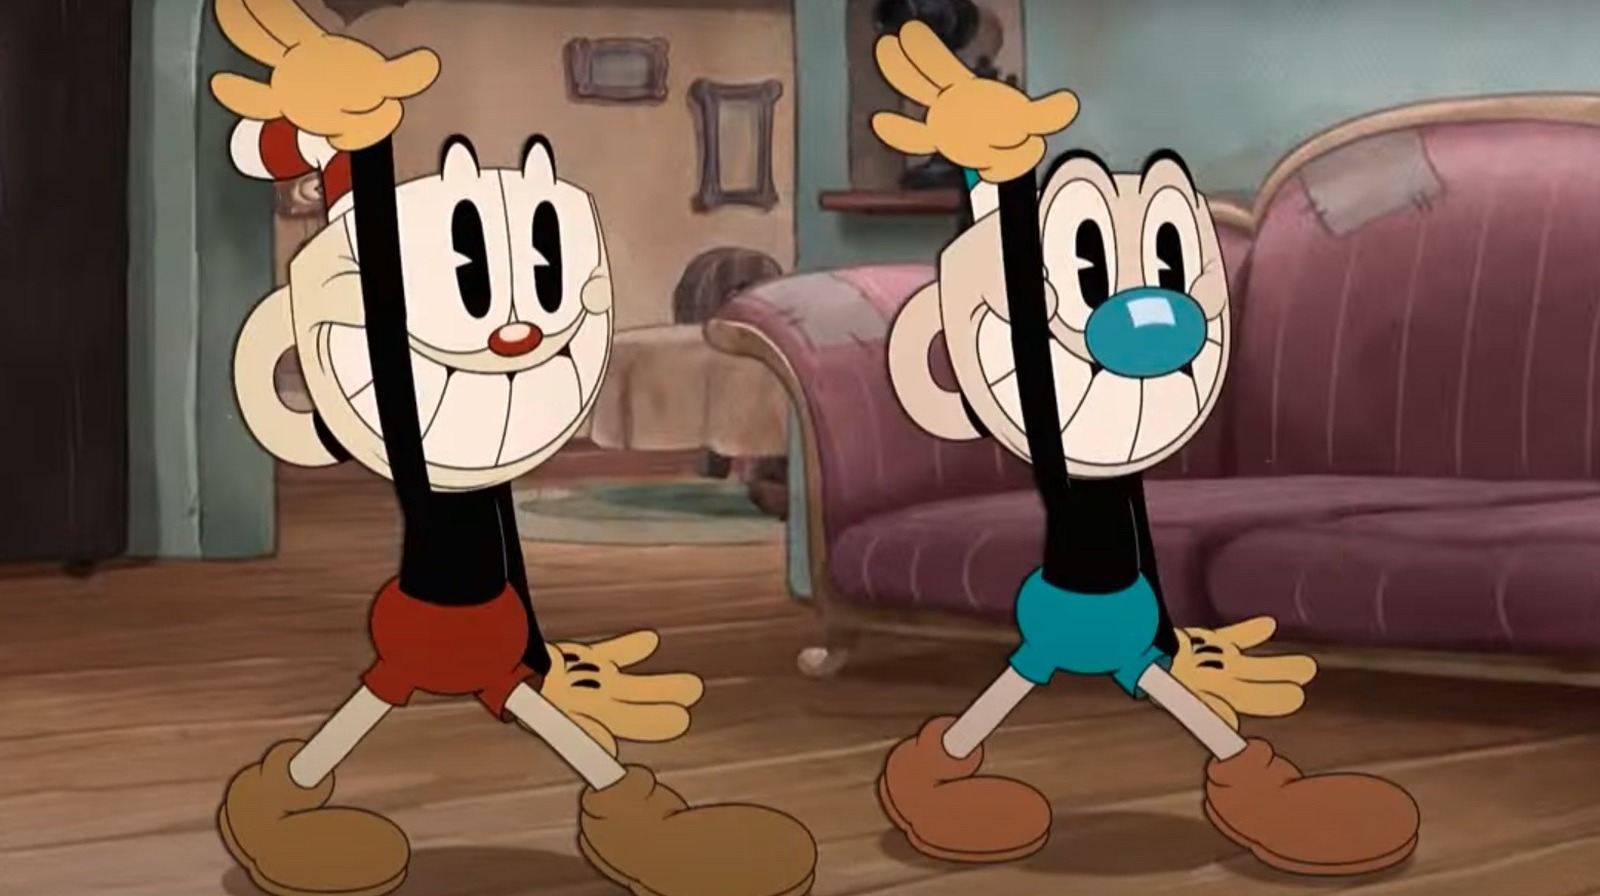 Netflix 'Cuphead' trailer: When will the show release in the